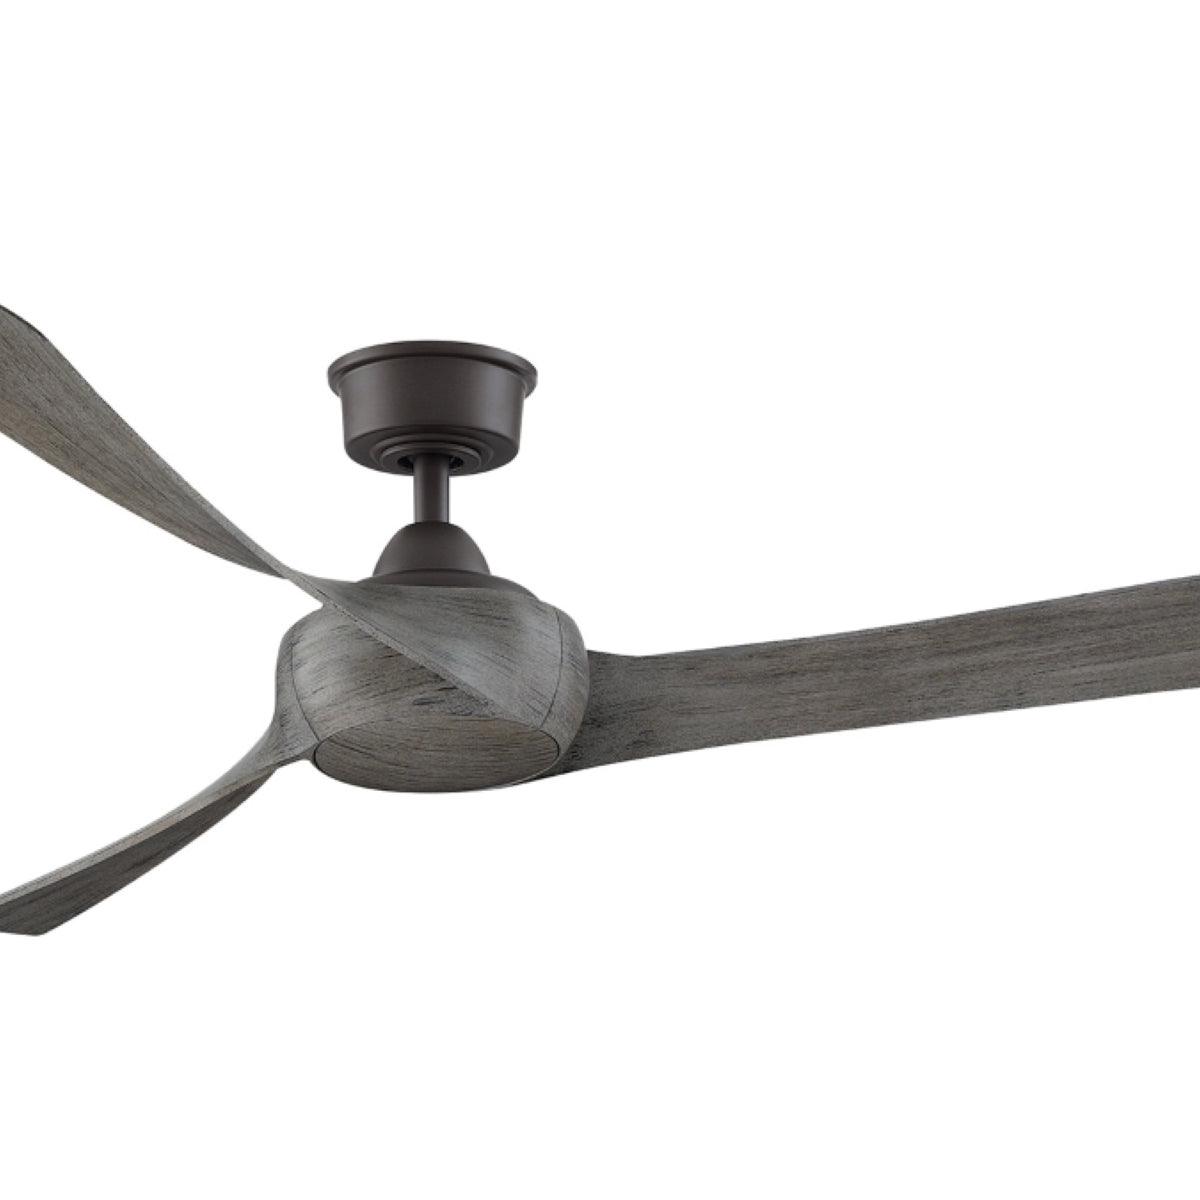 Wrap Custom Indoor/Outdoor Ceiling Fan Motor With Remote, Matte Greige Finish, 44-60" Blades Sold Separately - Bees Lighting